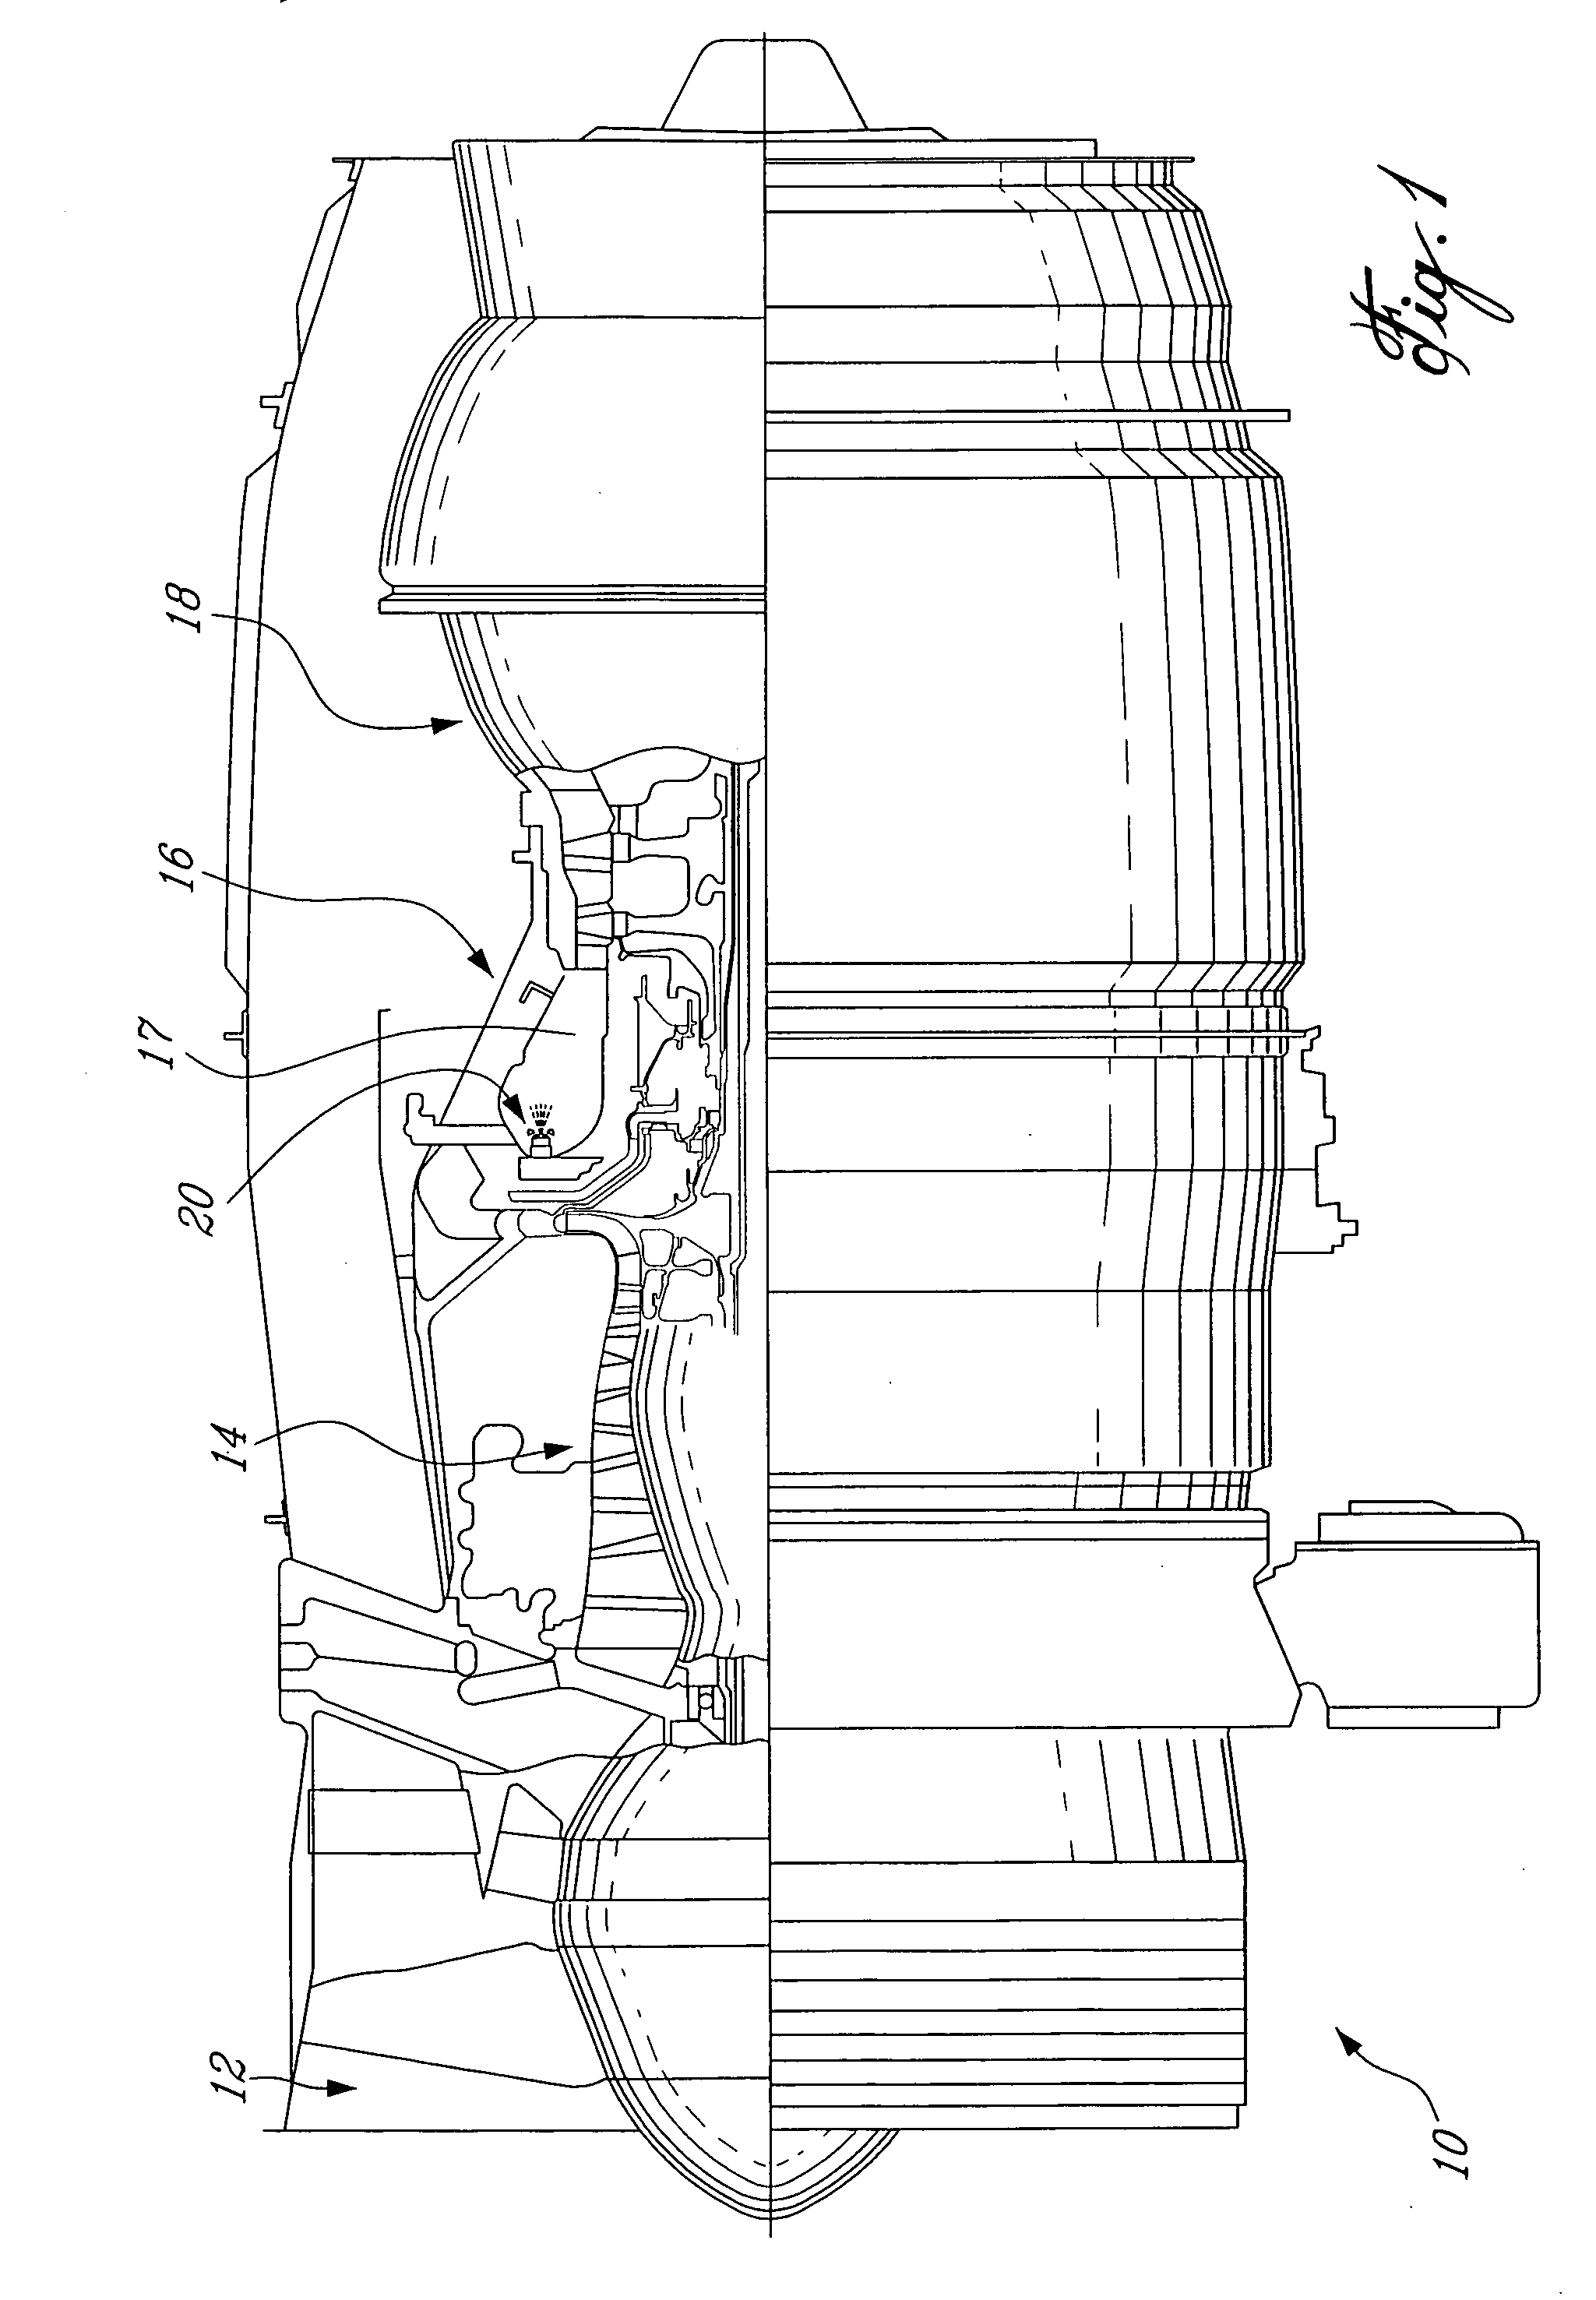 Apparatus for fuel transport and the like